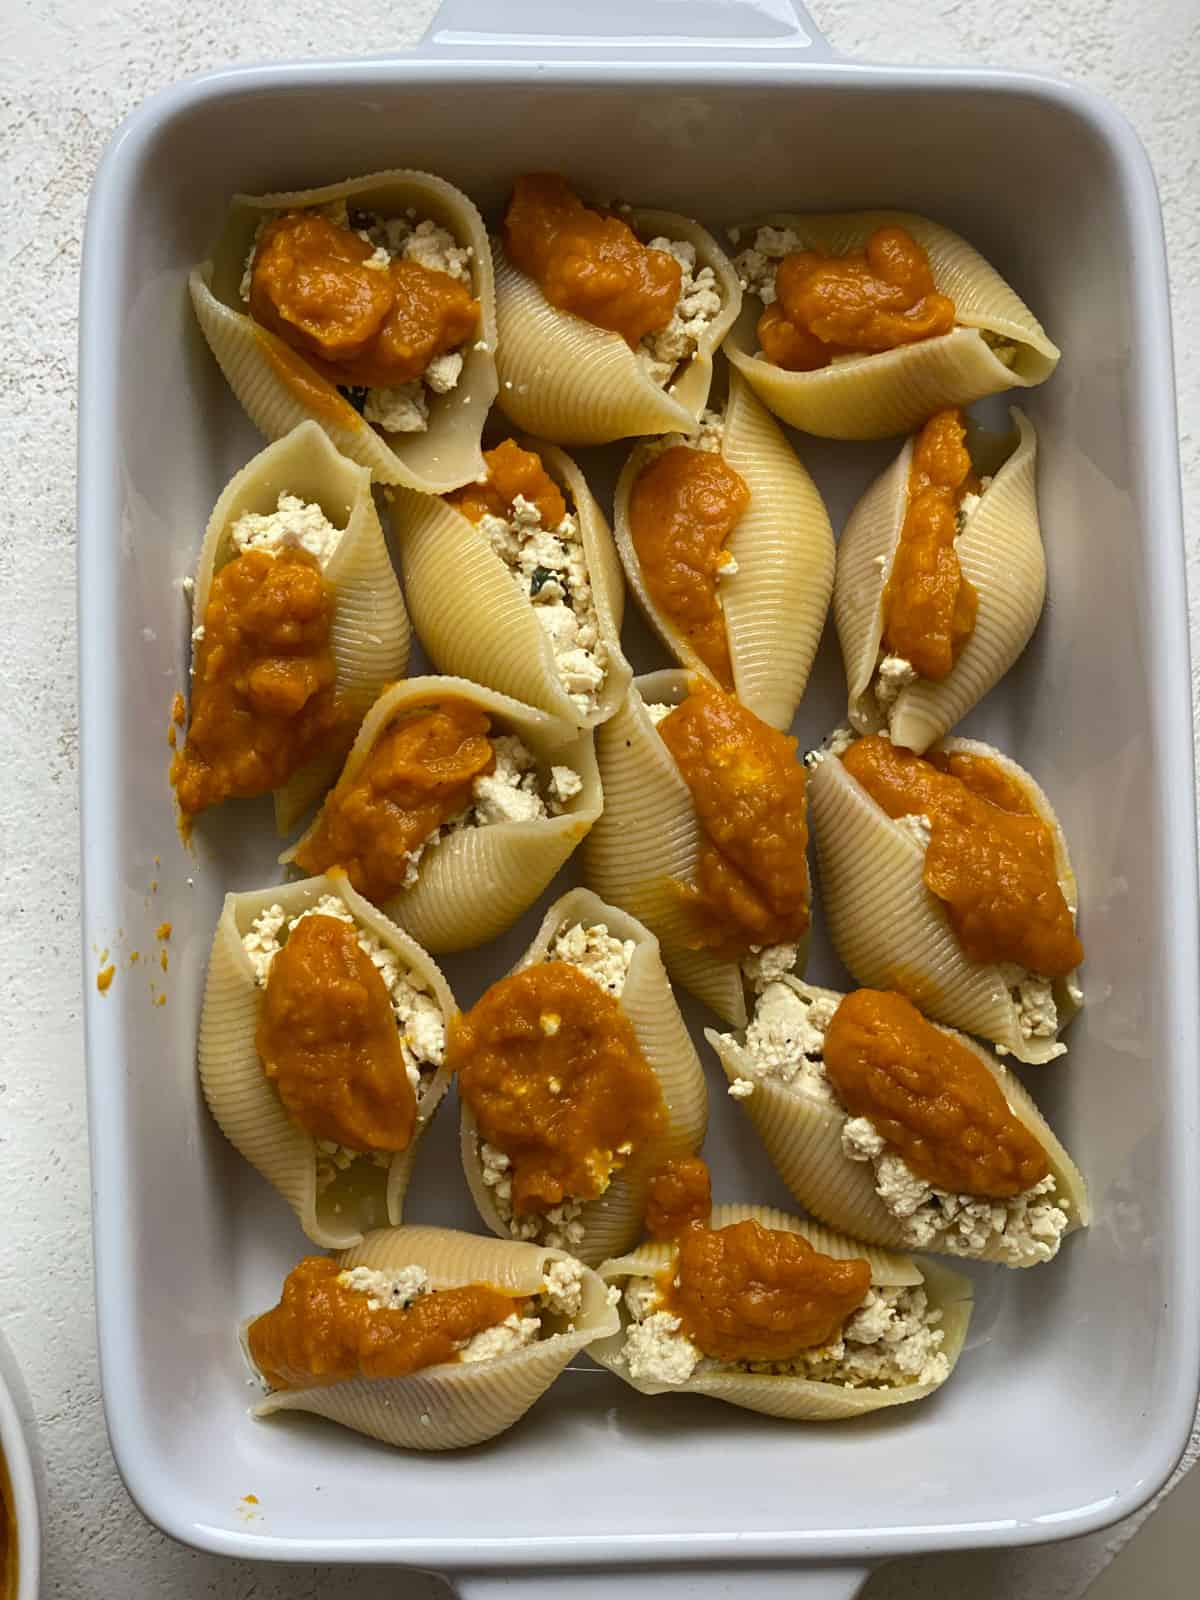 several pumpkin stuffed shells in a baking dish prior to being baked